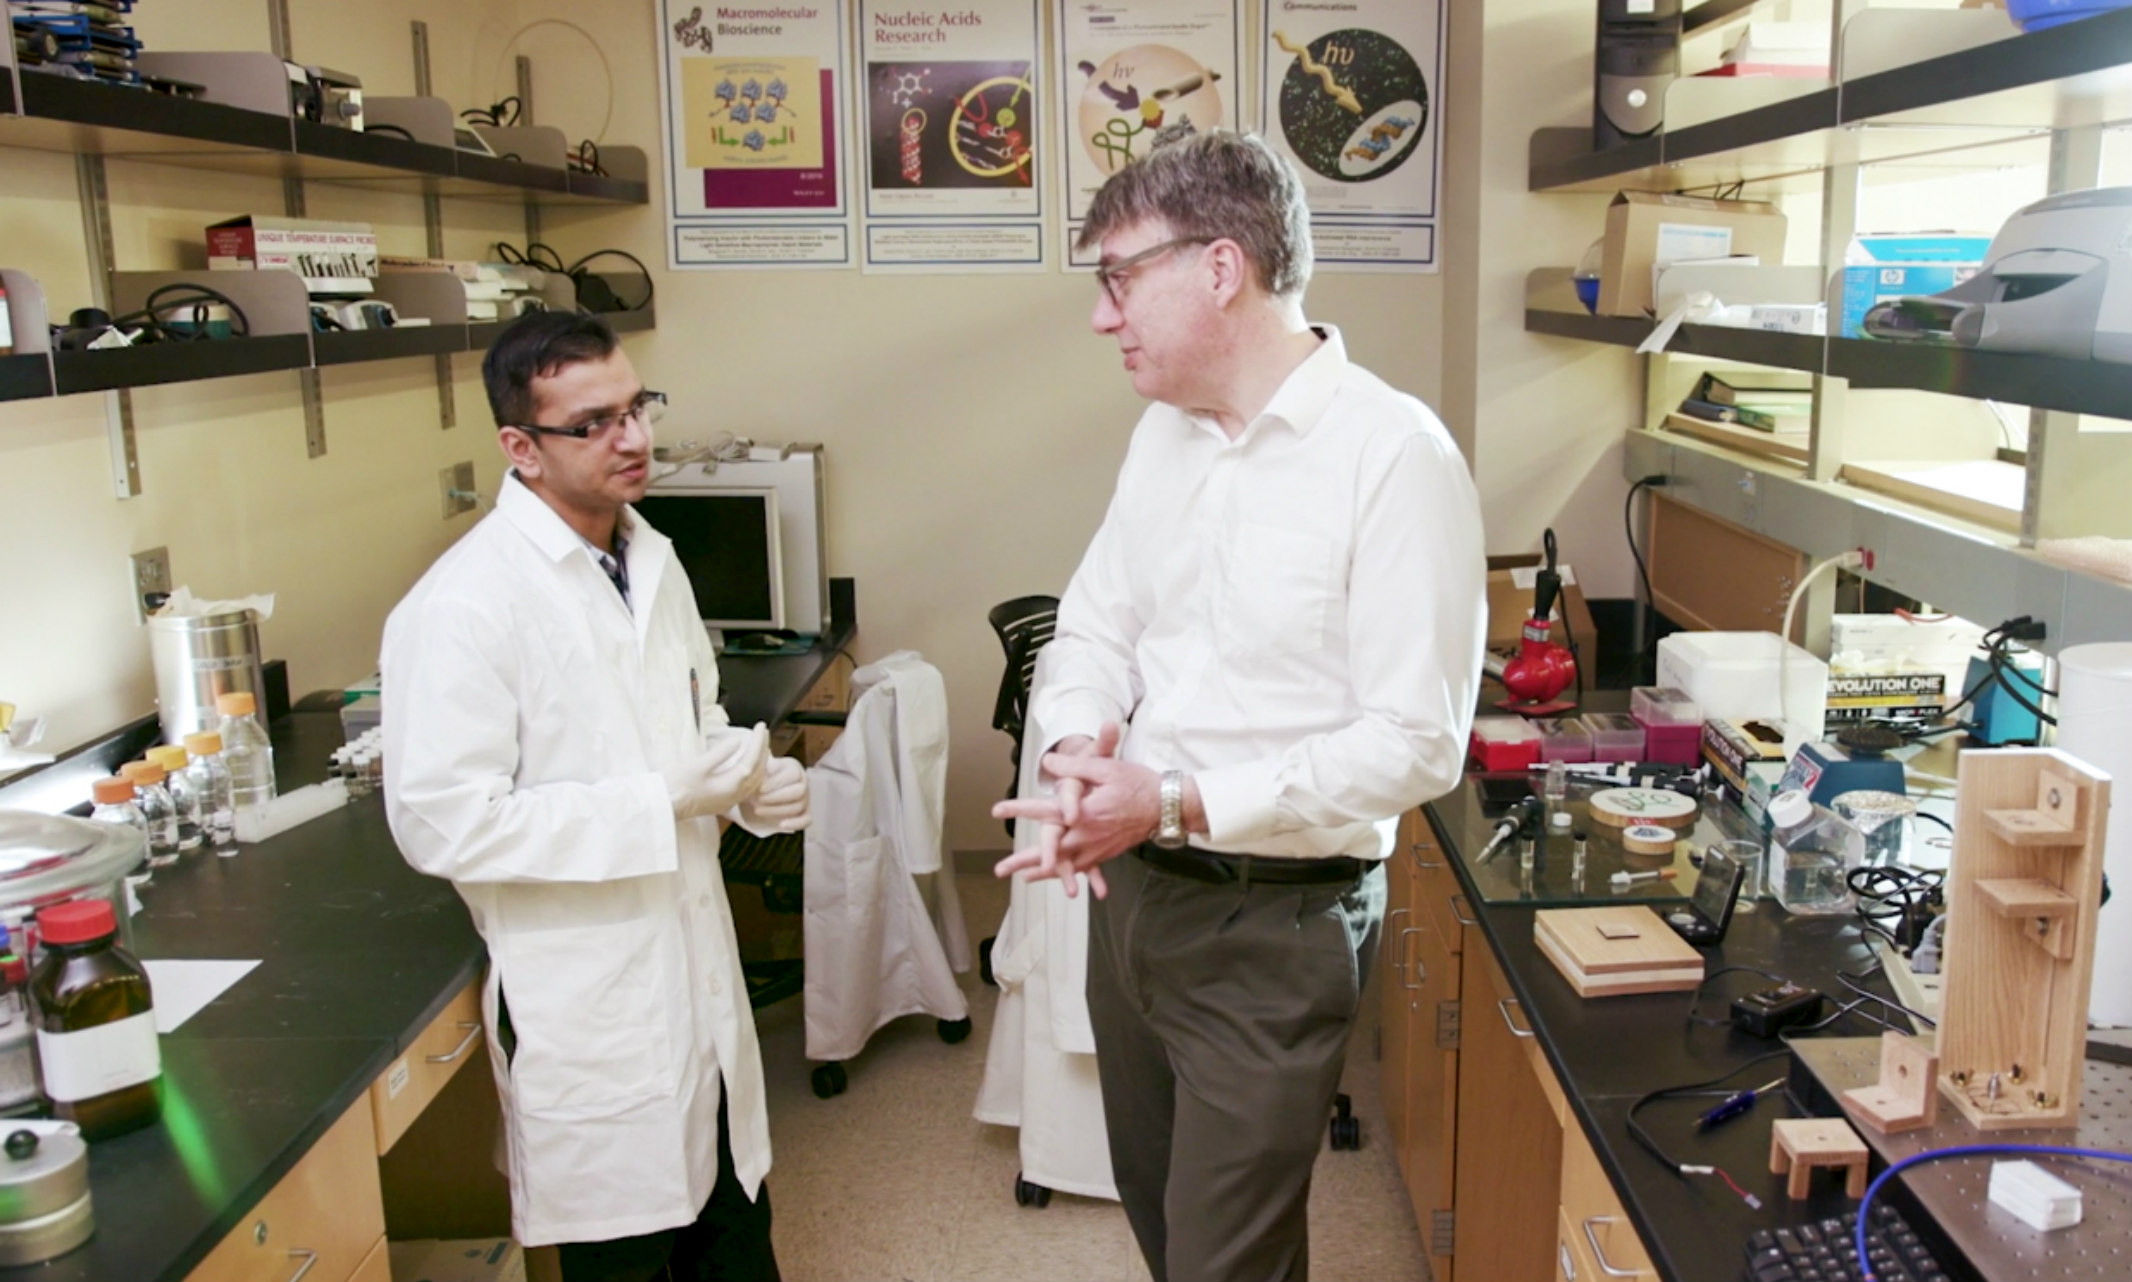 Simon Friedman, at right, with one of the researchers on his team.